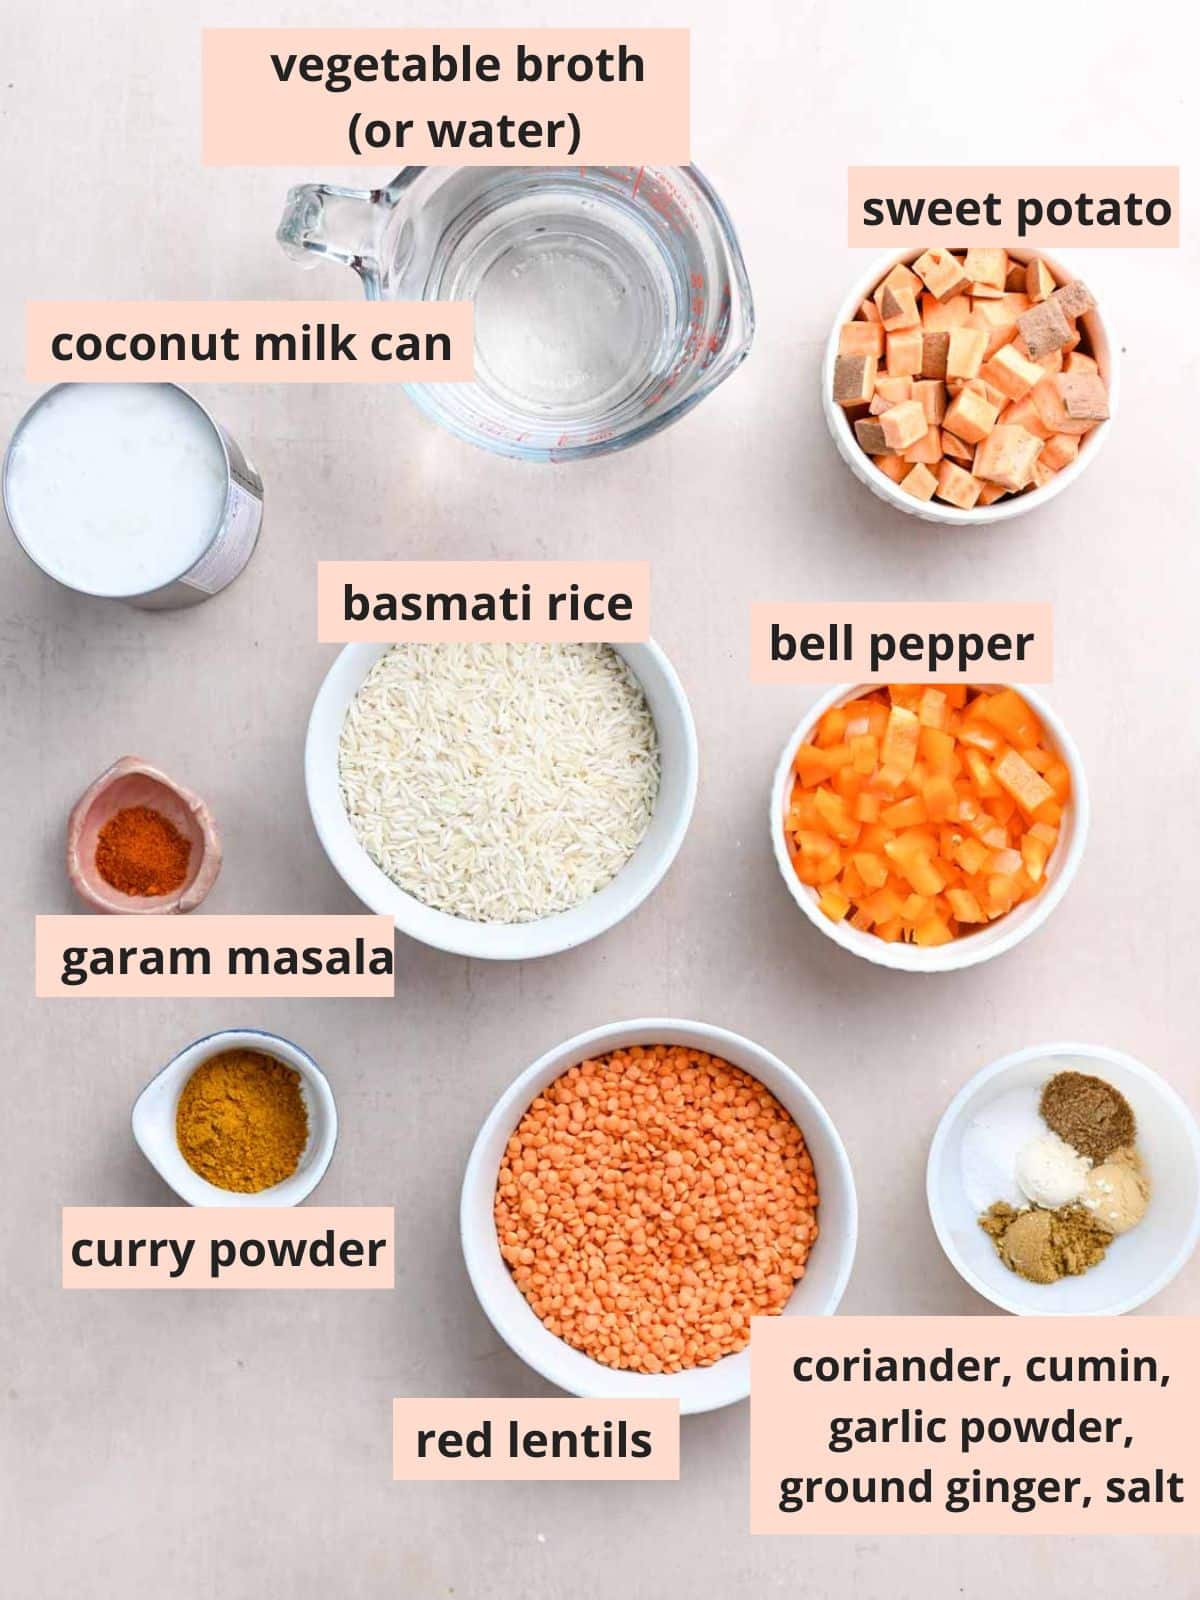 Labeled ingredients used to make red lentil casserole.